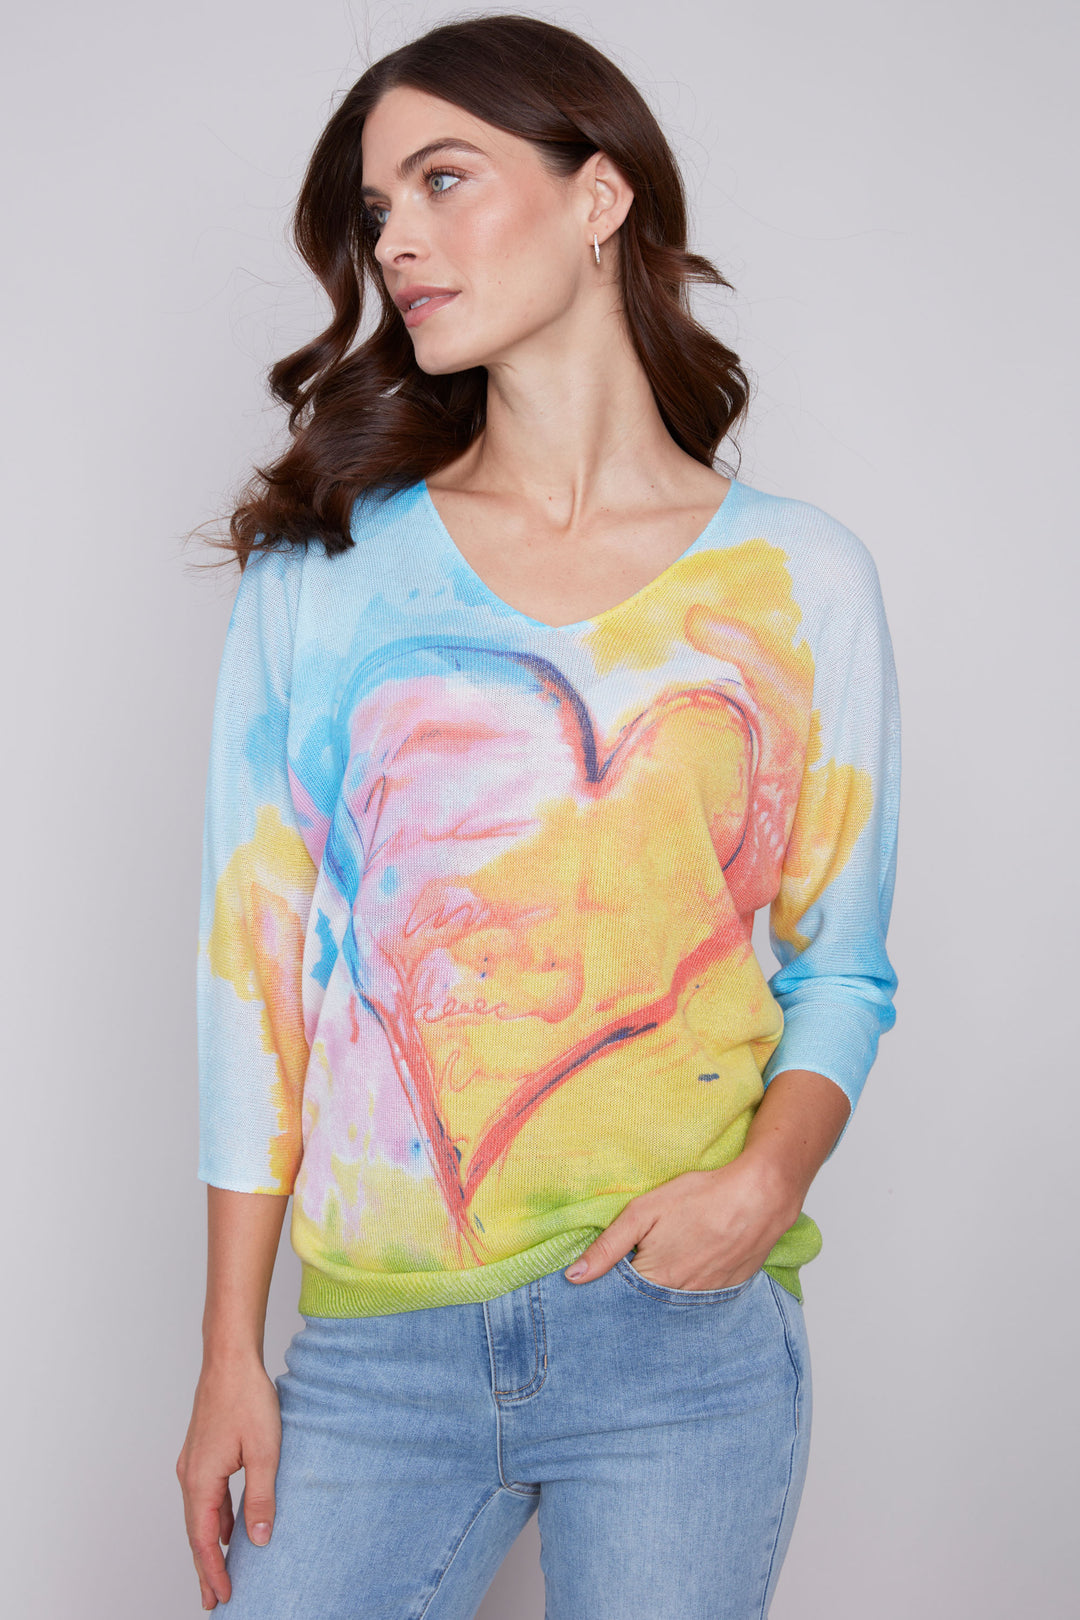 Featuring a soft cut v-neck and classic dolman sleeves, this charming heart print will add a playful touch to your wardrobe.